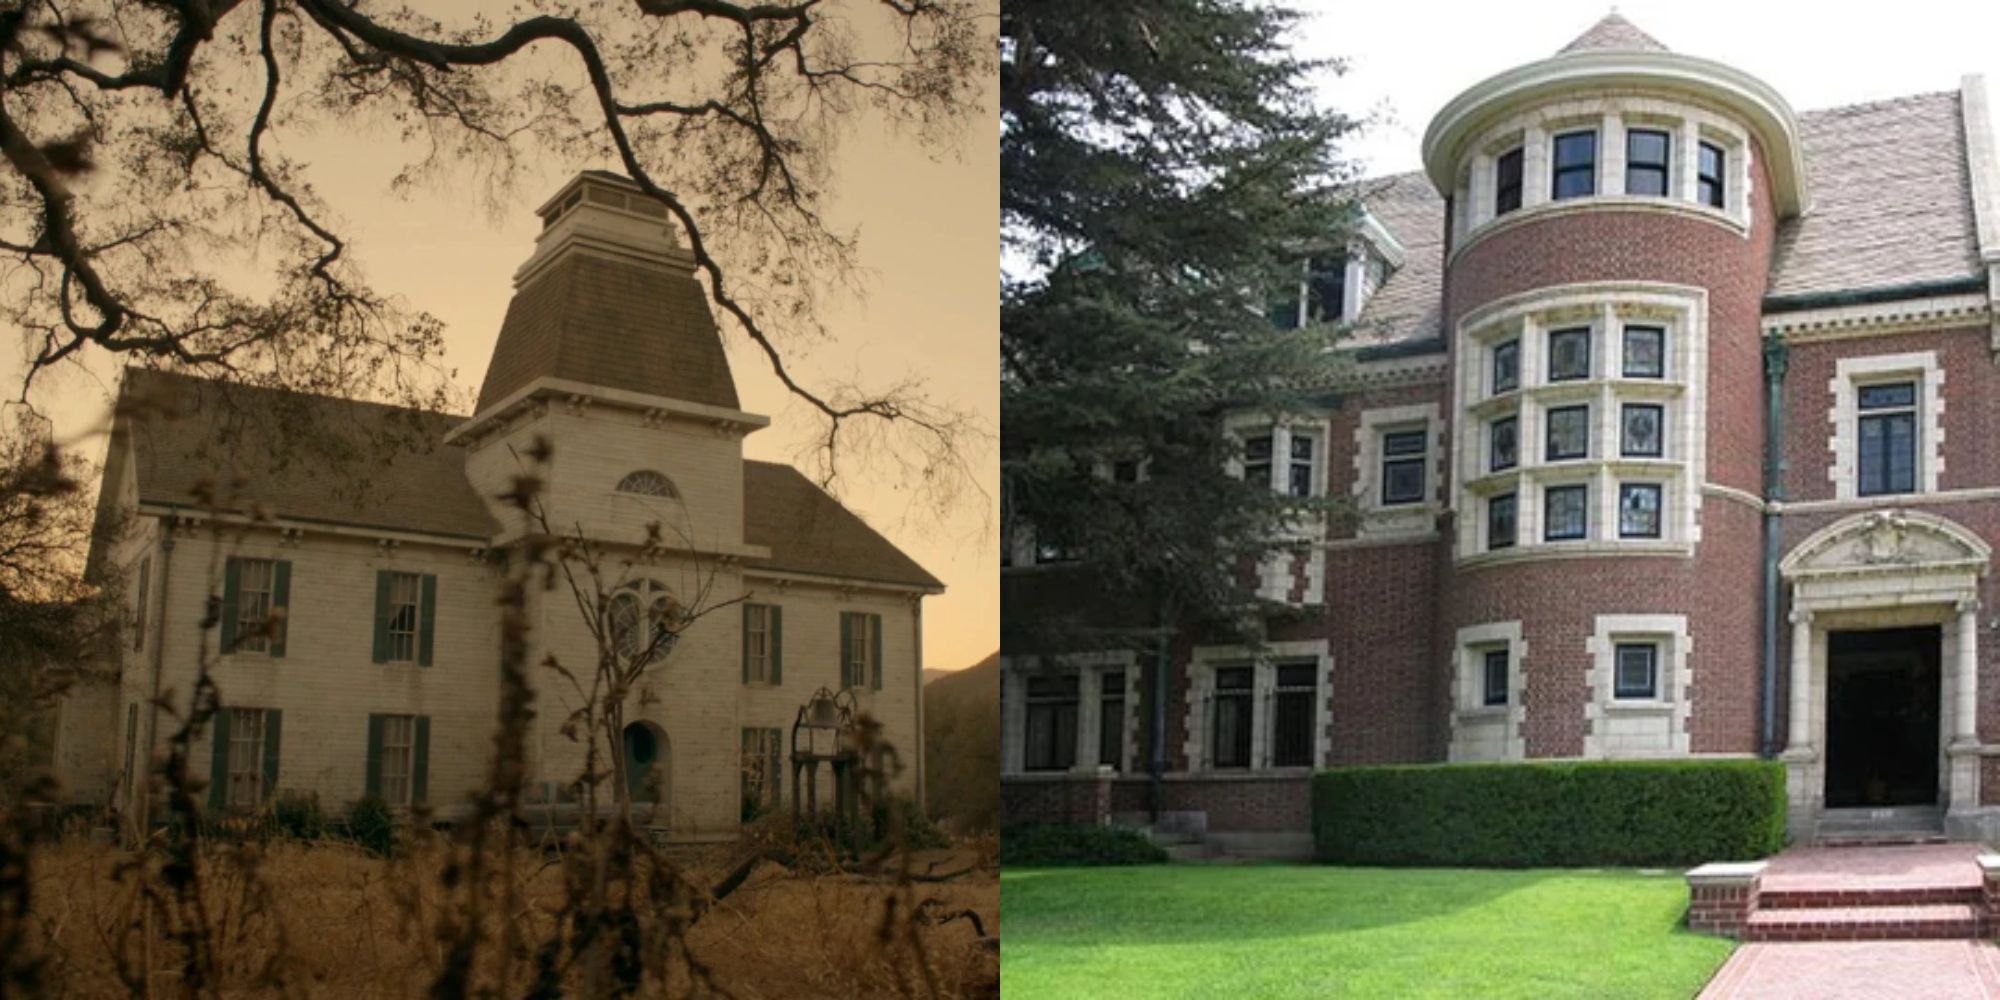 American Horror Story: 10 Filming Locations You Can Visit